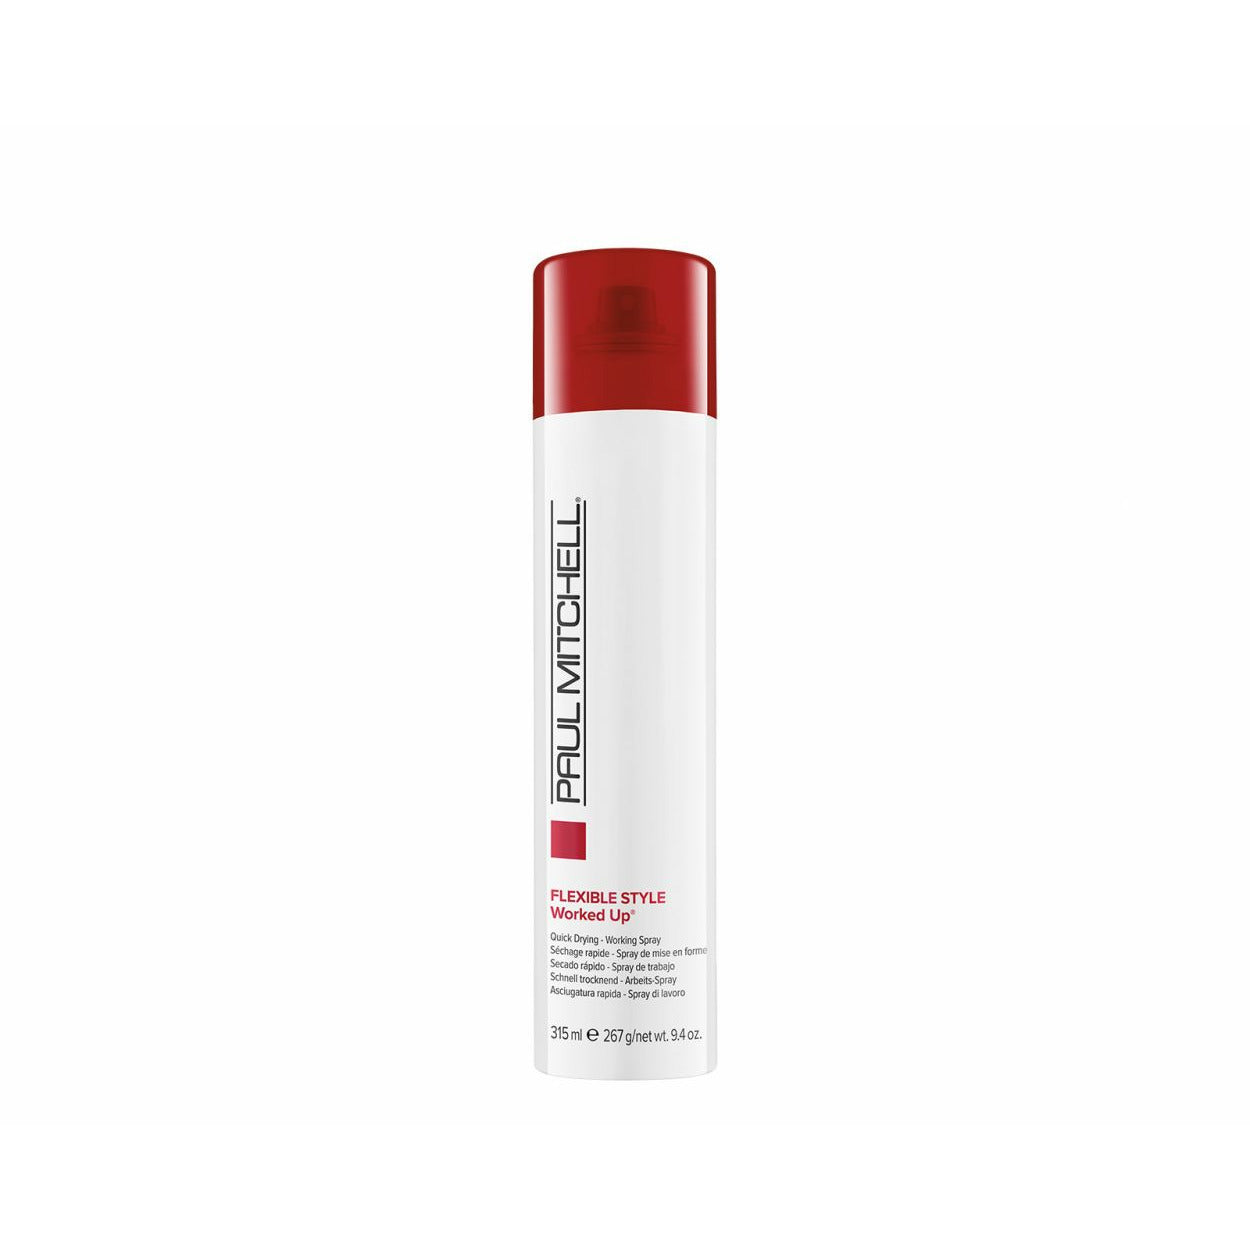 Paul Mitchell Flexible Style Worked Up Spray